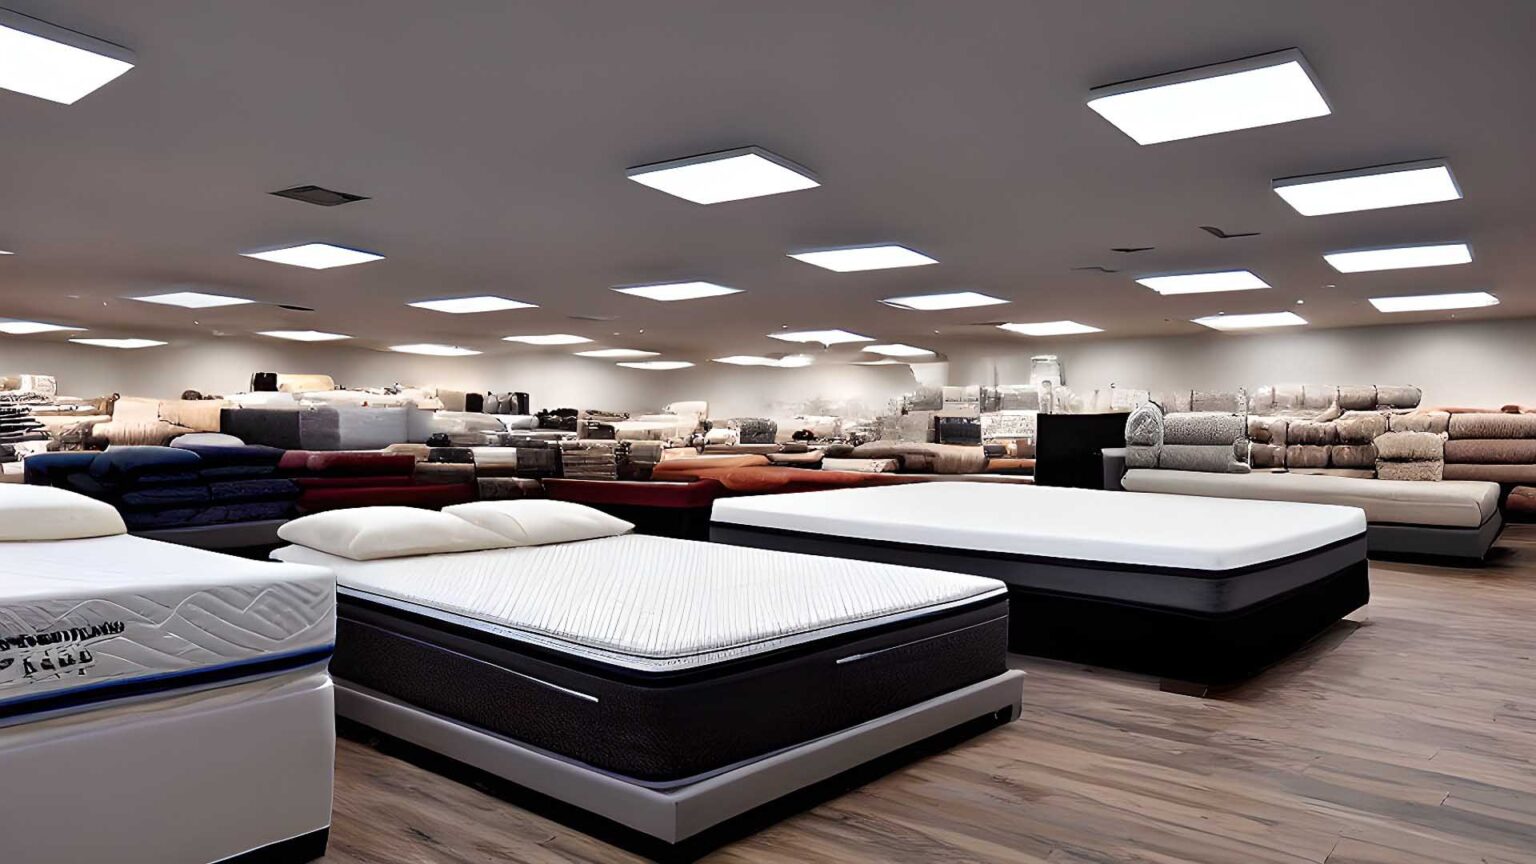 Mattress Stores, mattress dealers, and mattress retailers near me in Albany, OR